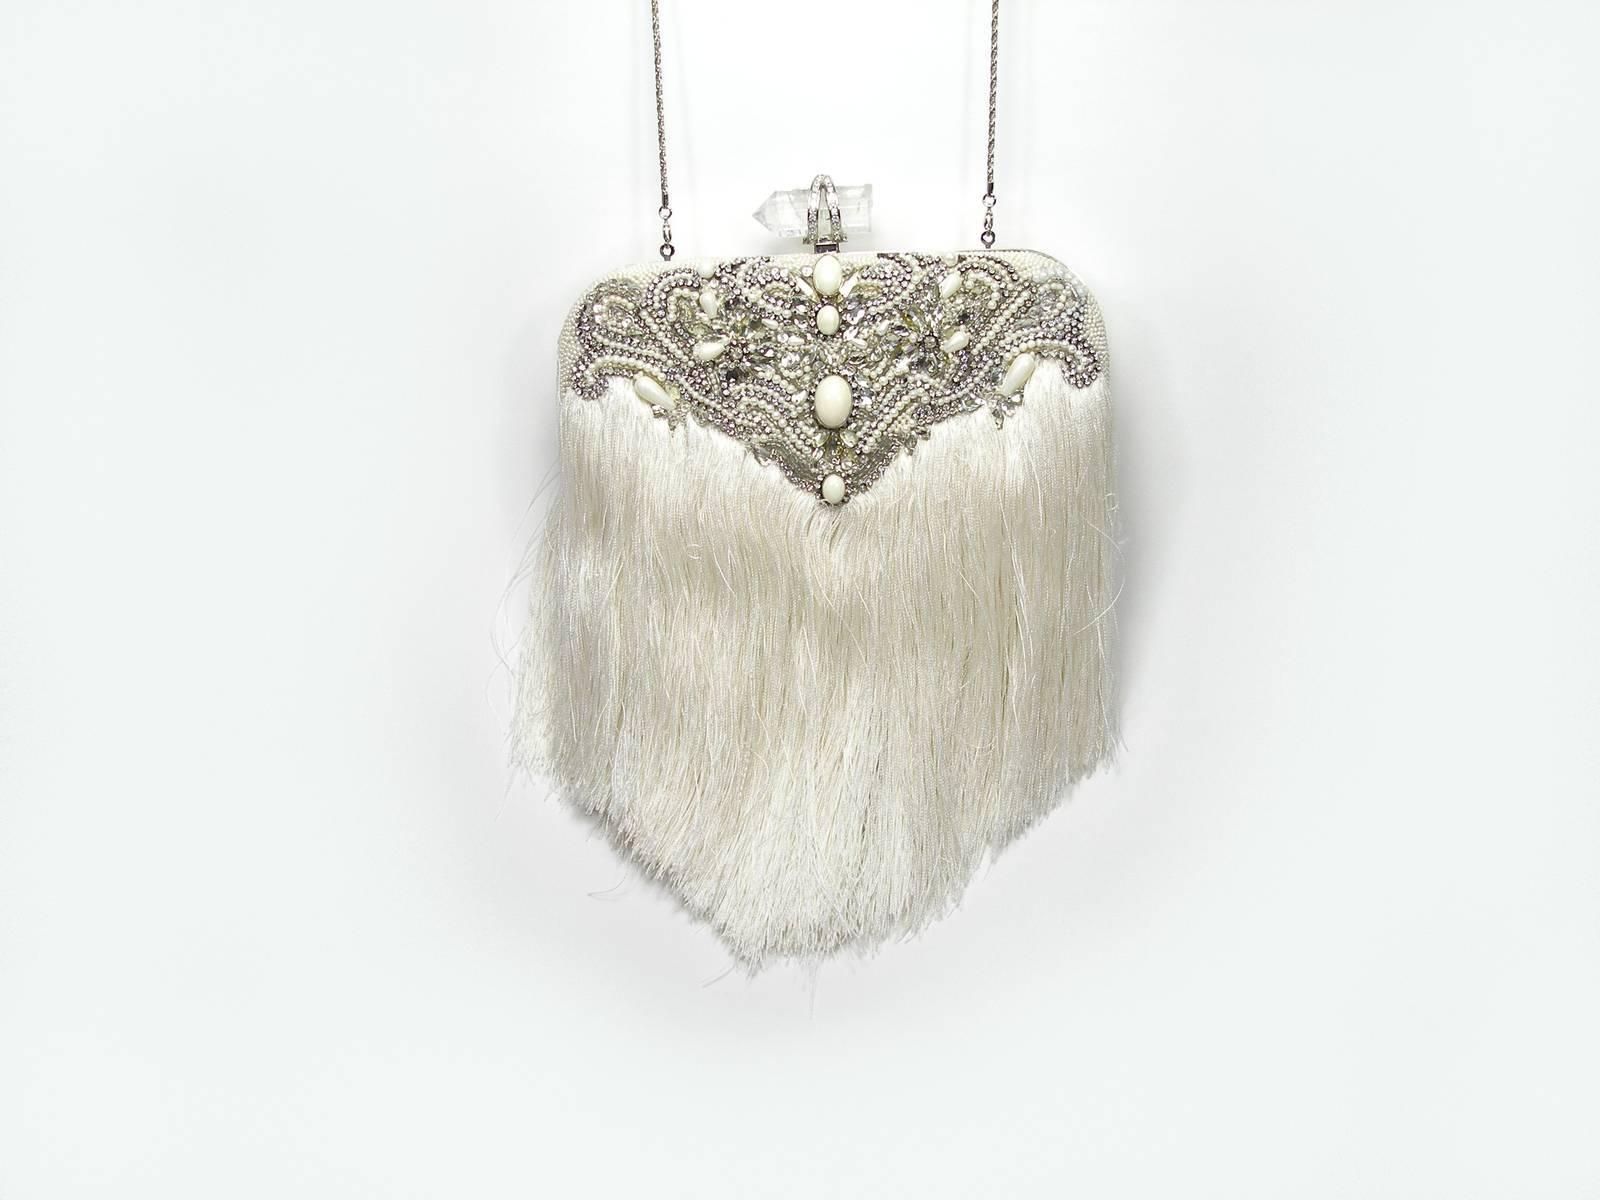 Magnificent Piece by Couture Marchesa
Embroidered and embellished with stones
Removable  chain shoulder strap with Fringe
Interior lining with a slip pocket
Frame opening with push-lock closure, embellished with crystal stones 
Size: 25 X 20 X4 cm 